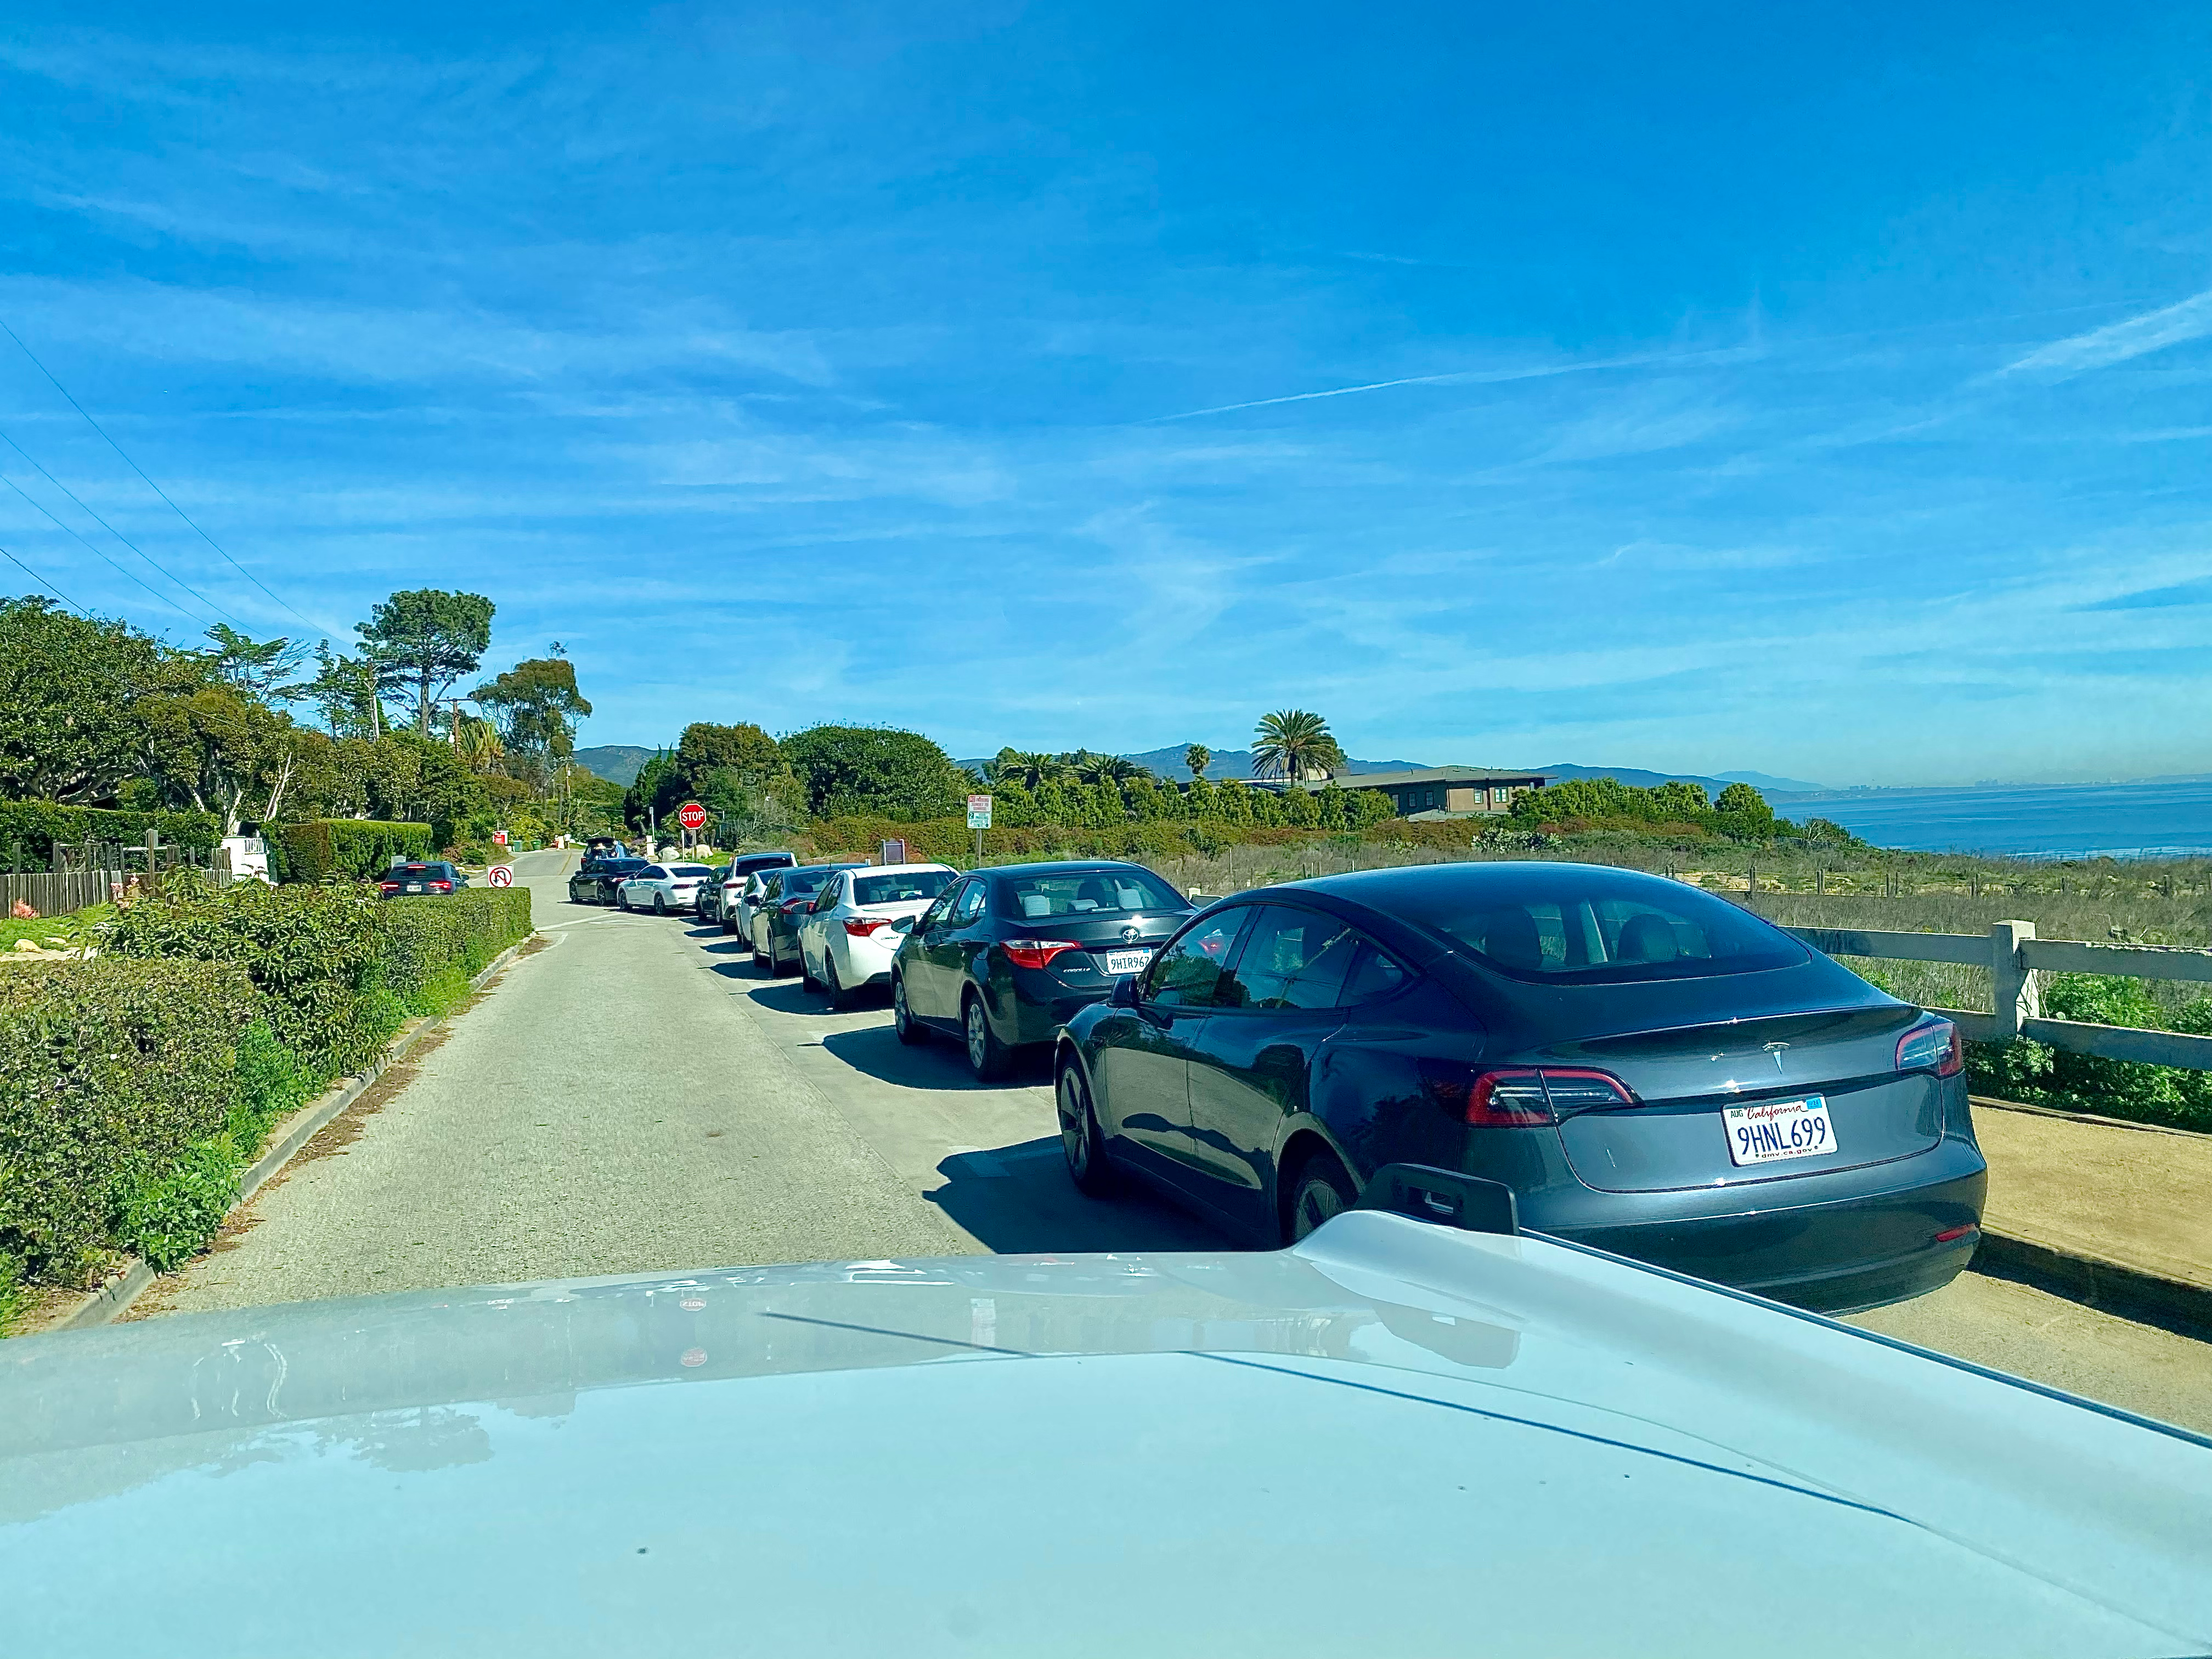 Point Dume Parking